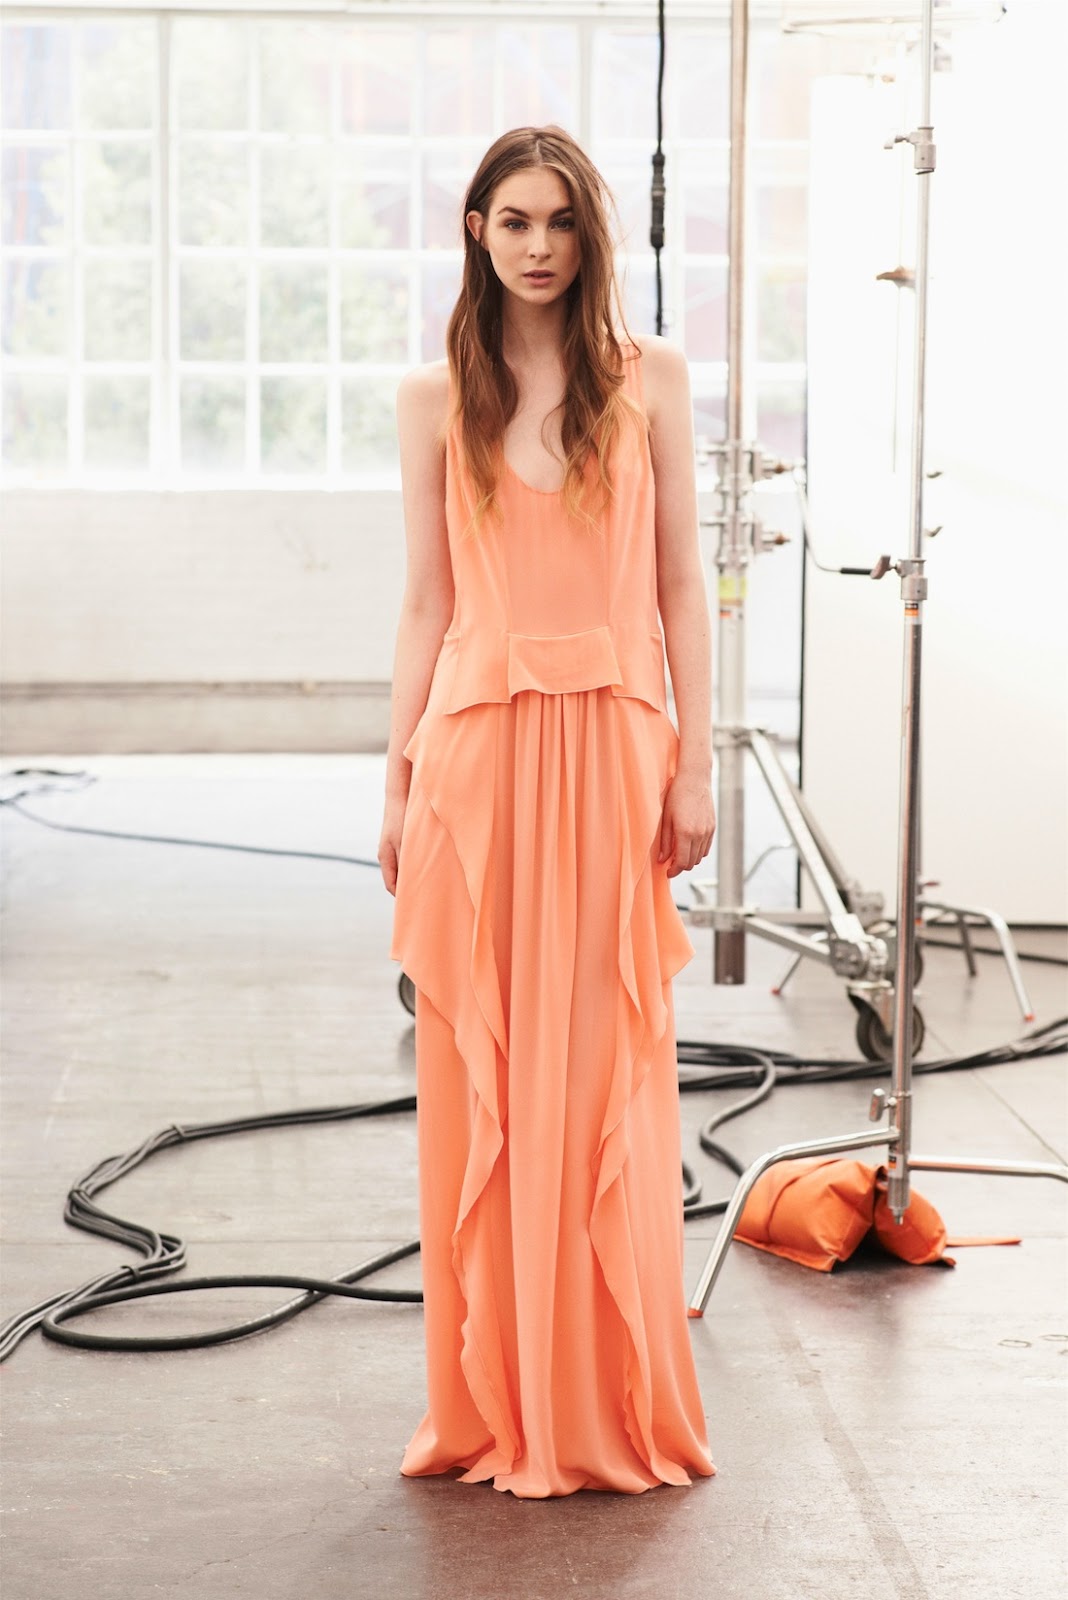 laura love for thakoon addition s/s 13 new york | visual optimism ...